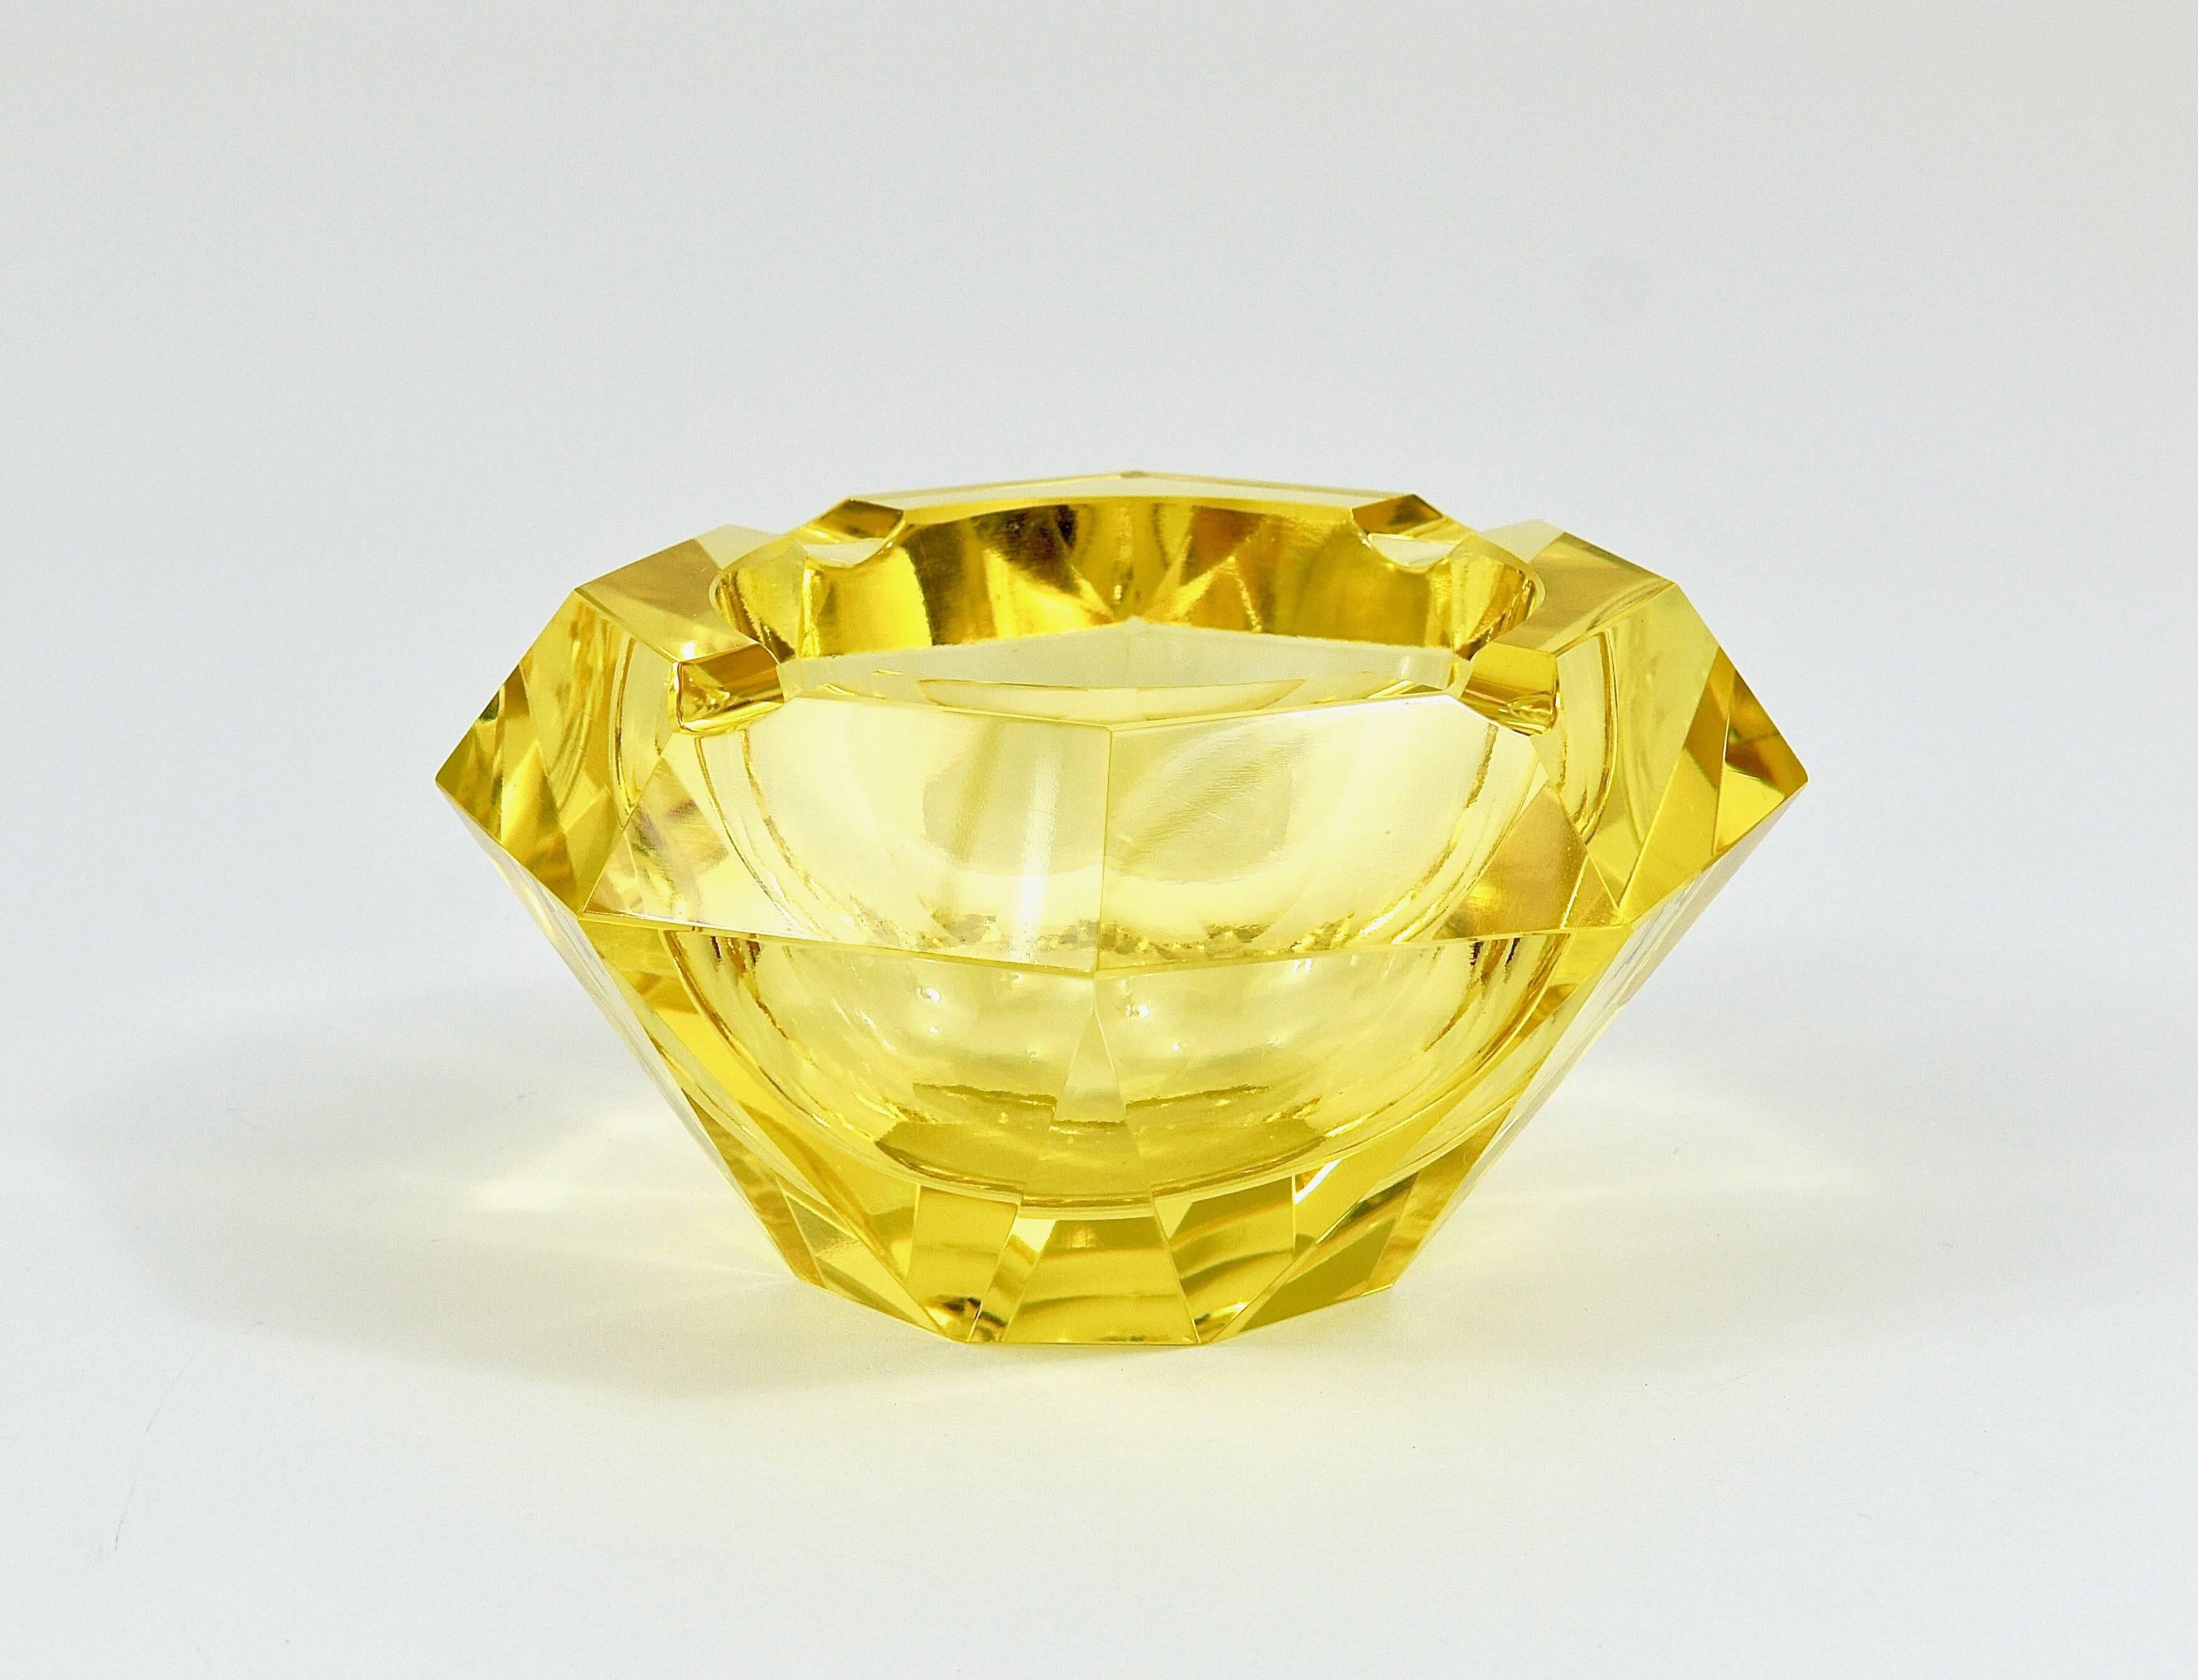 Italian 1930s Lemon Faceted Diamond Ashtray in Excellent Condition, Murano, Italy